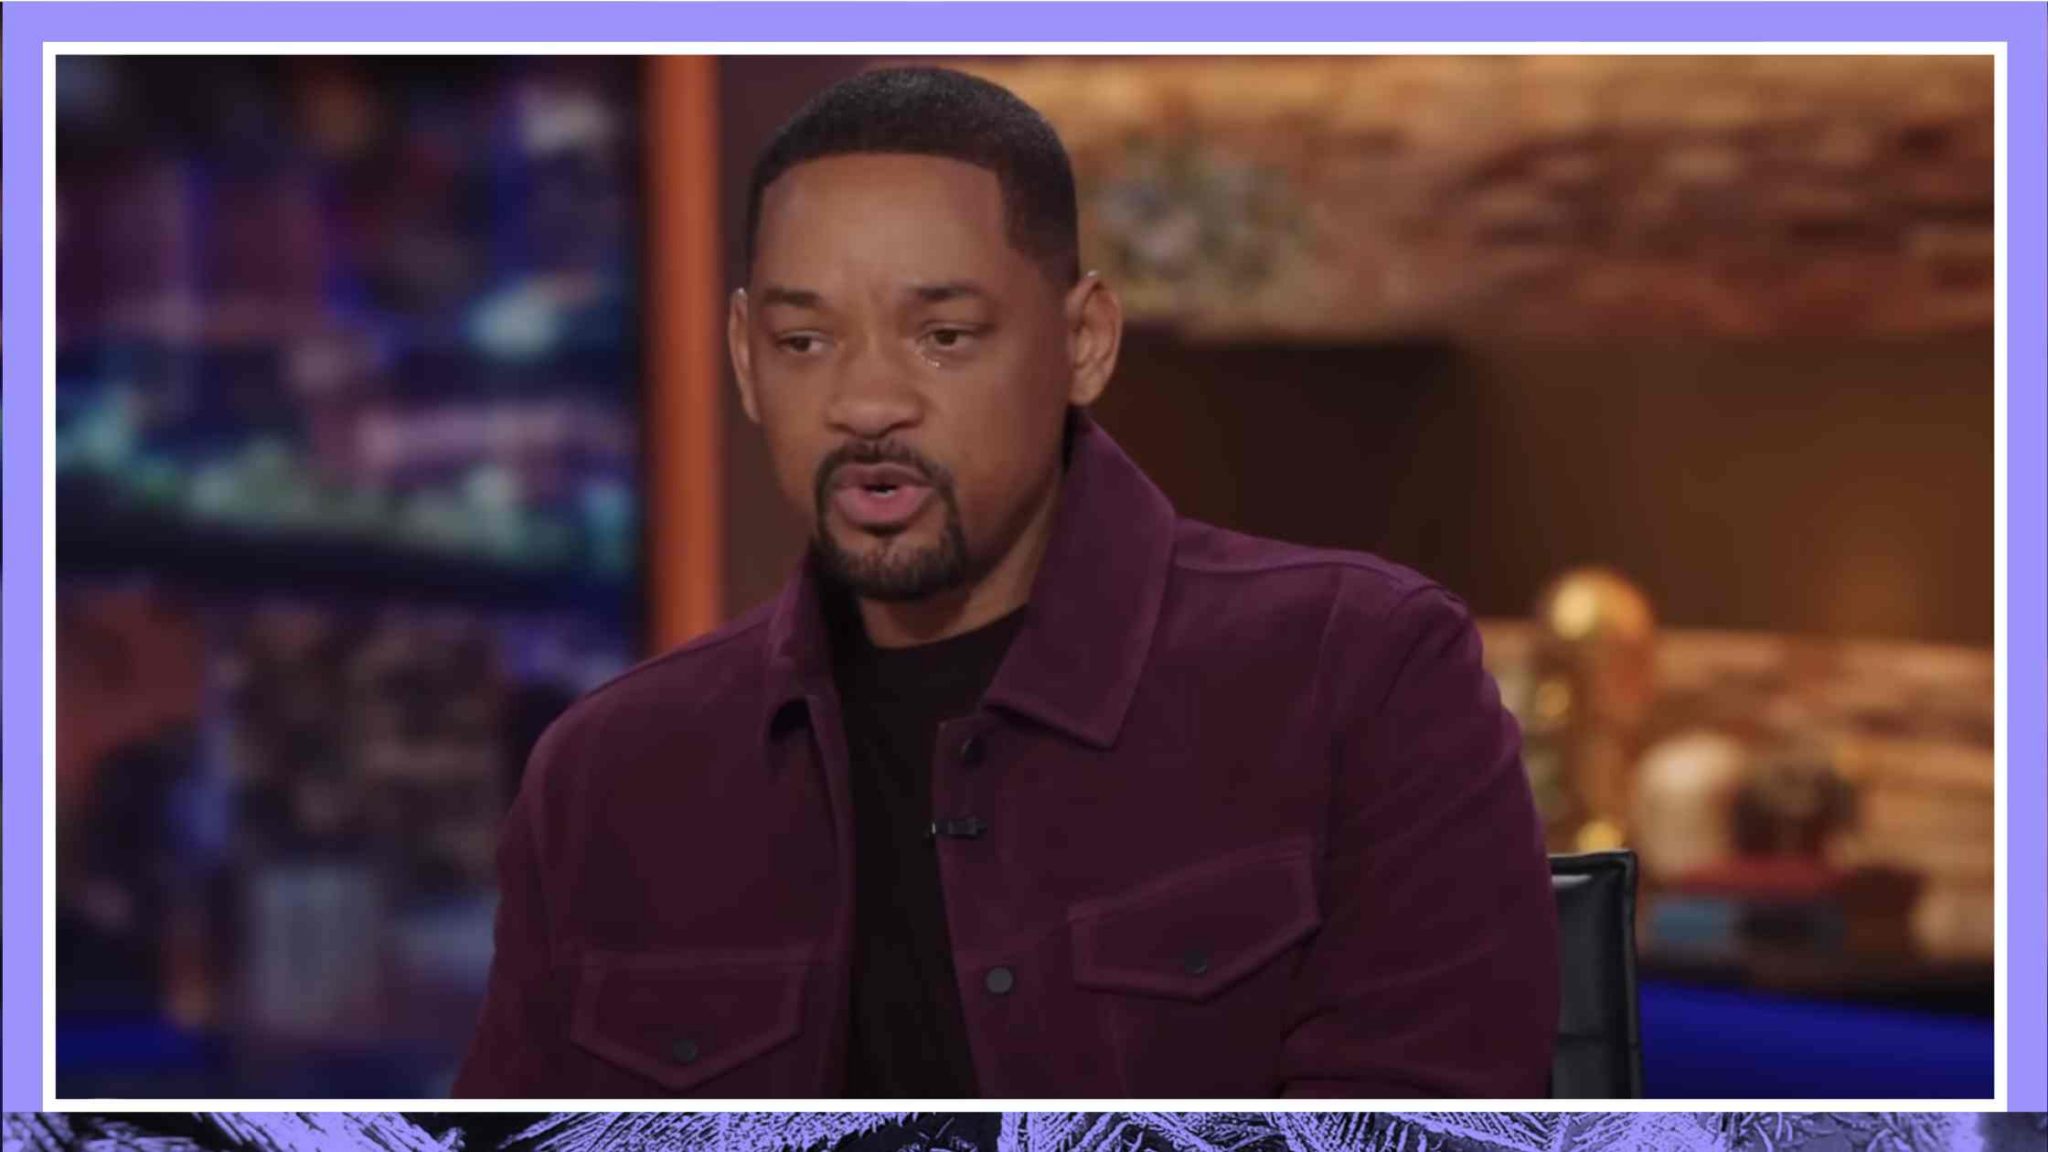 Will Smith gives first mainstream interview since "The Slap", discusses the Oscars and "Emancipation" Transcript